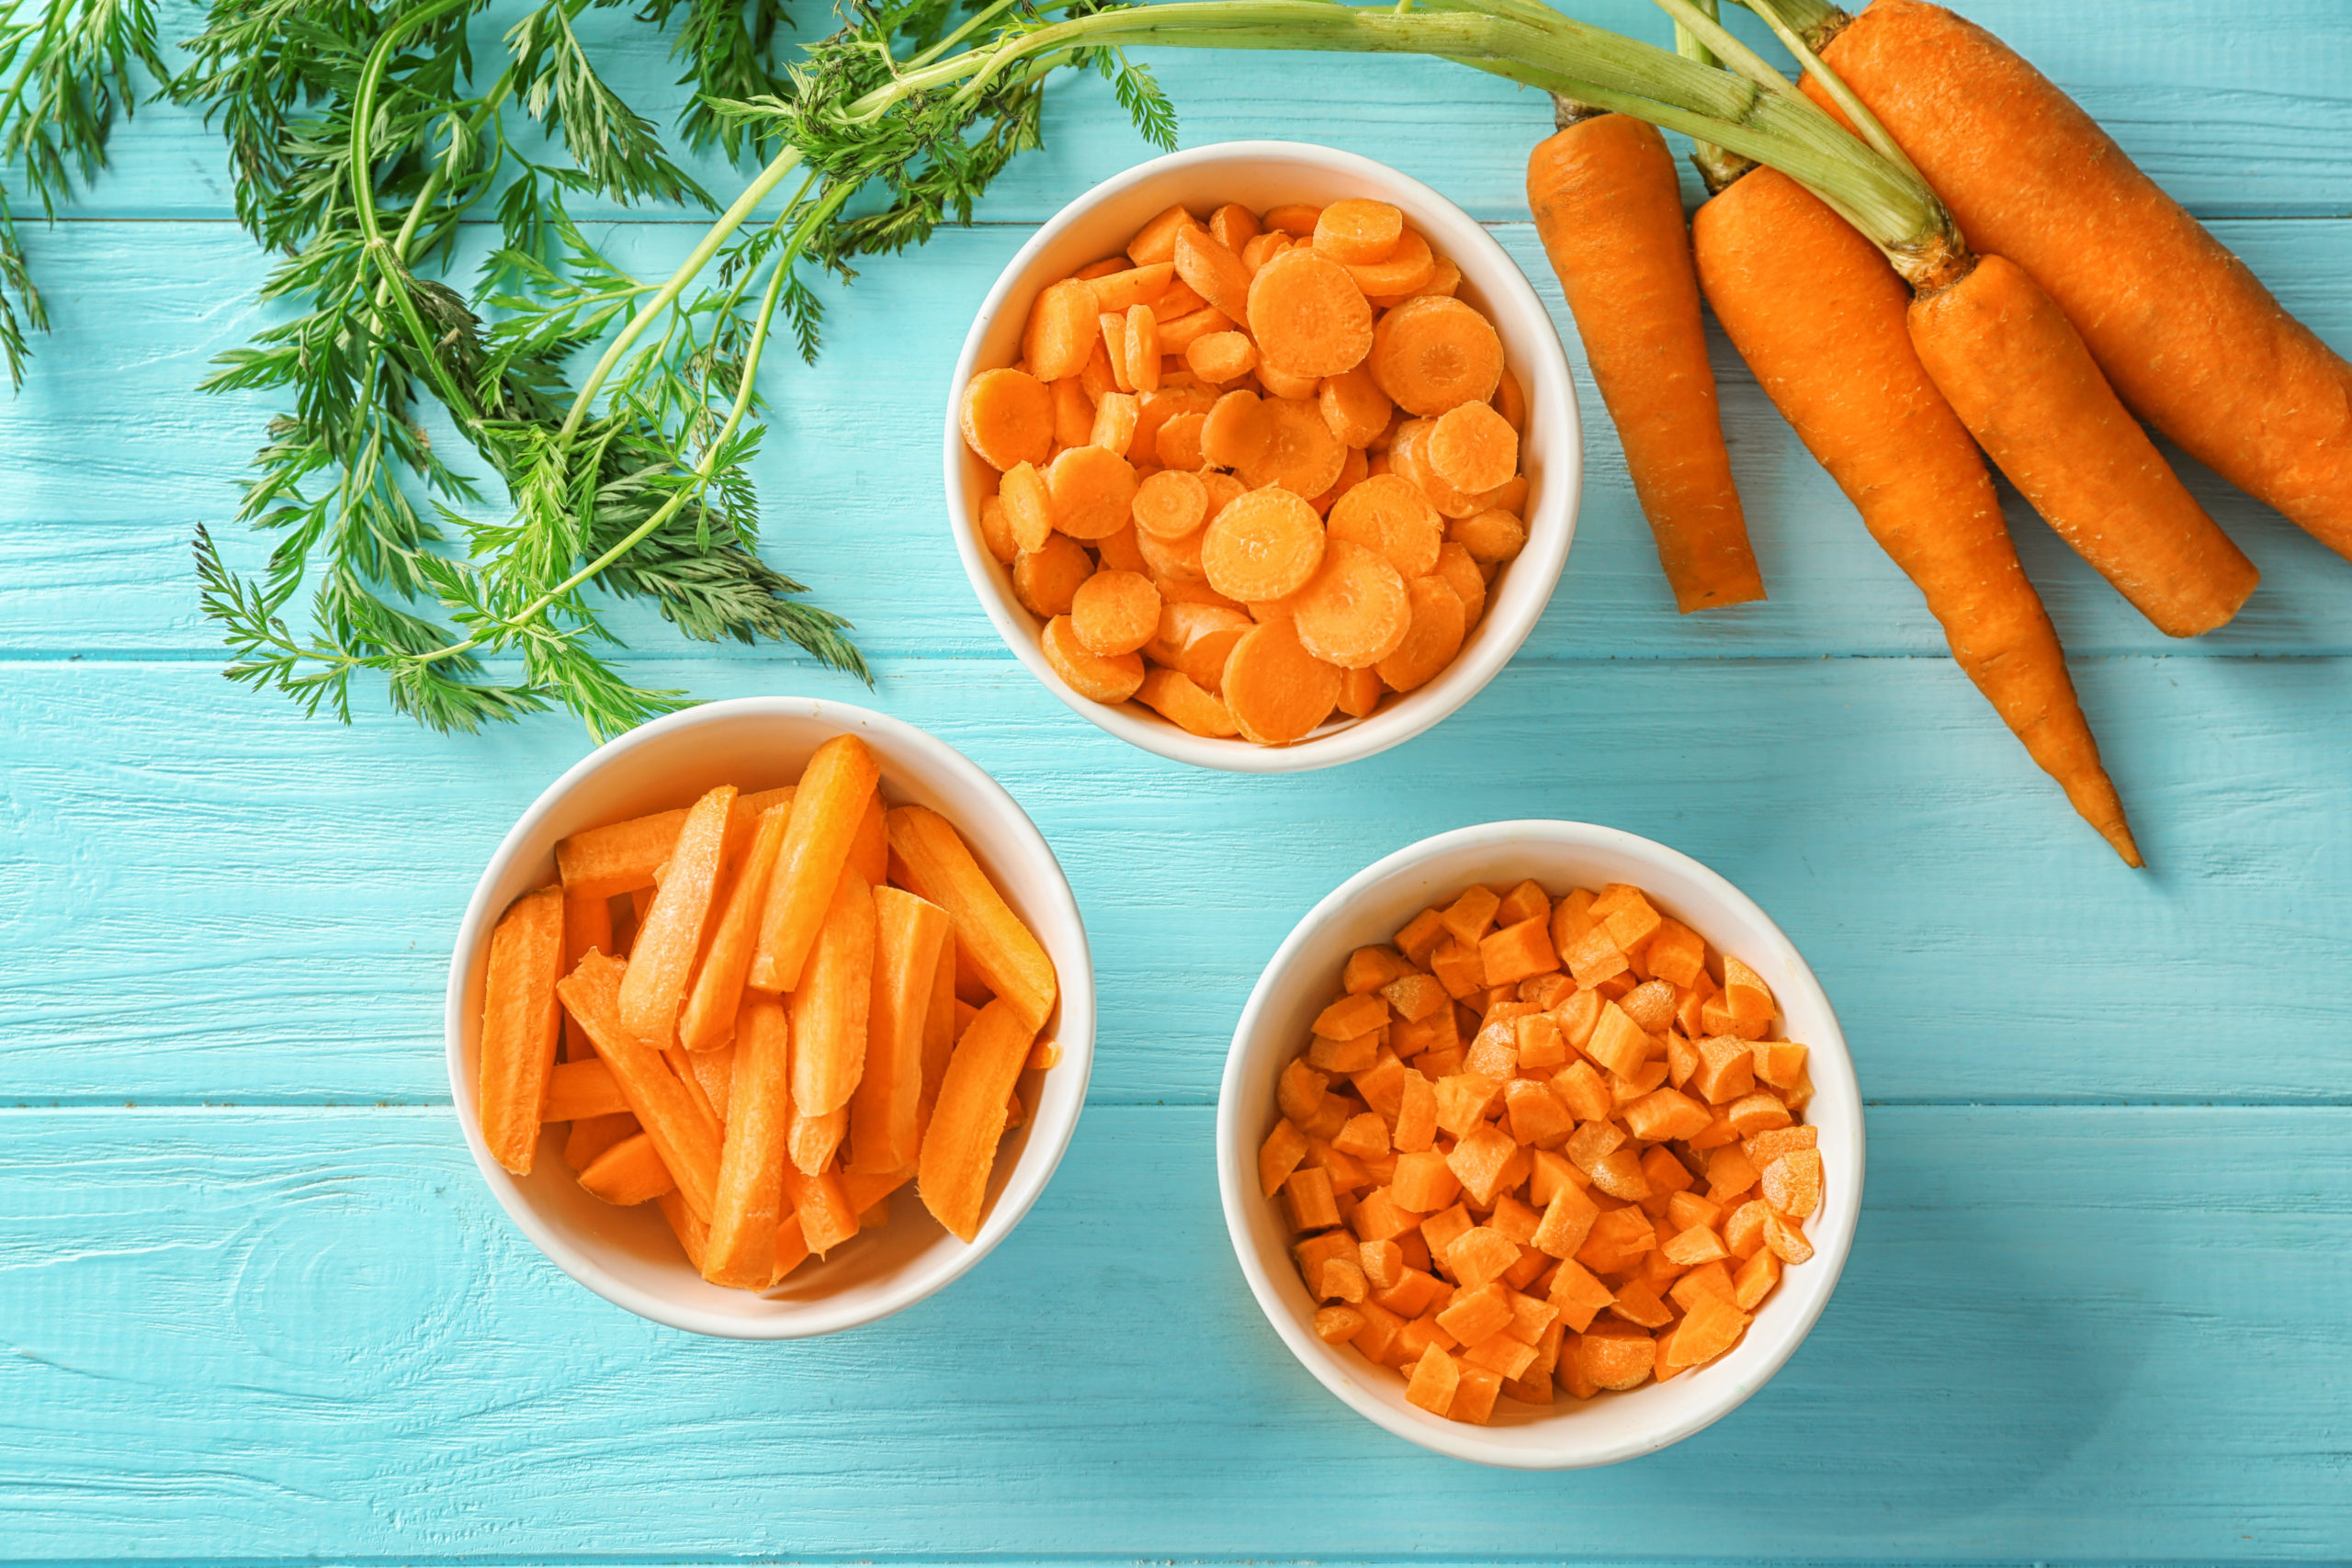 Carrot is such a versatile vegetable that can be cooked and used in so many different dishes, or eaten raw.